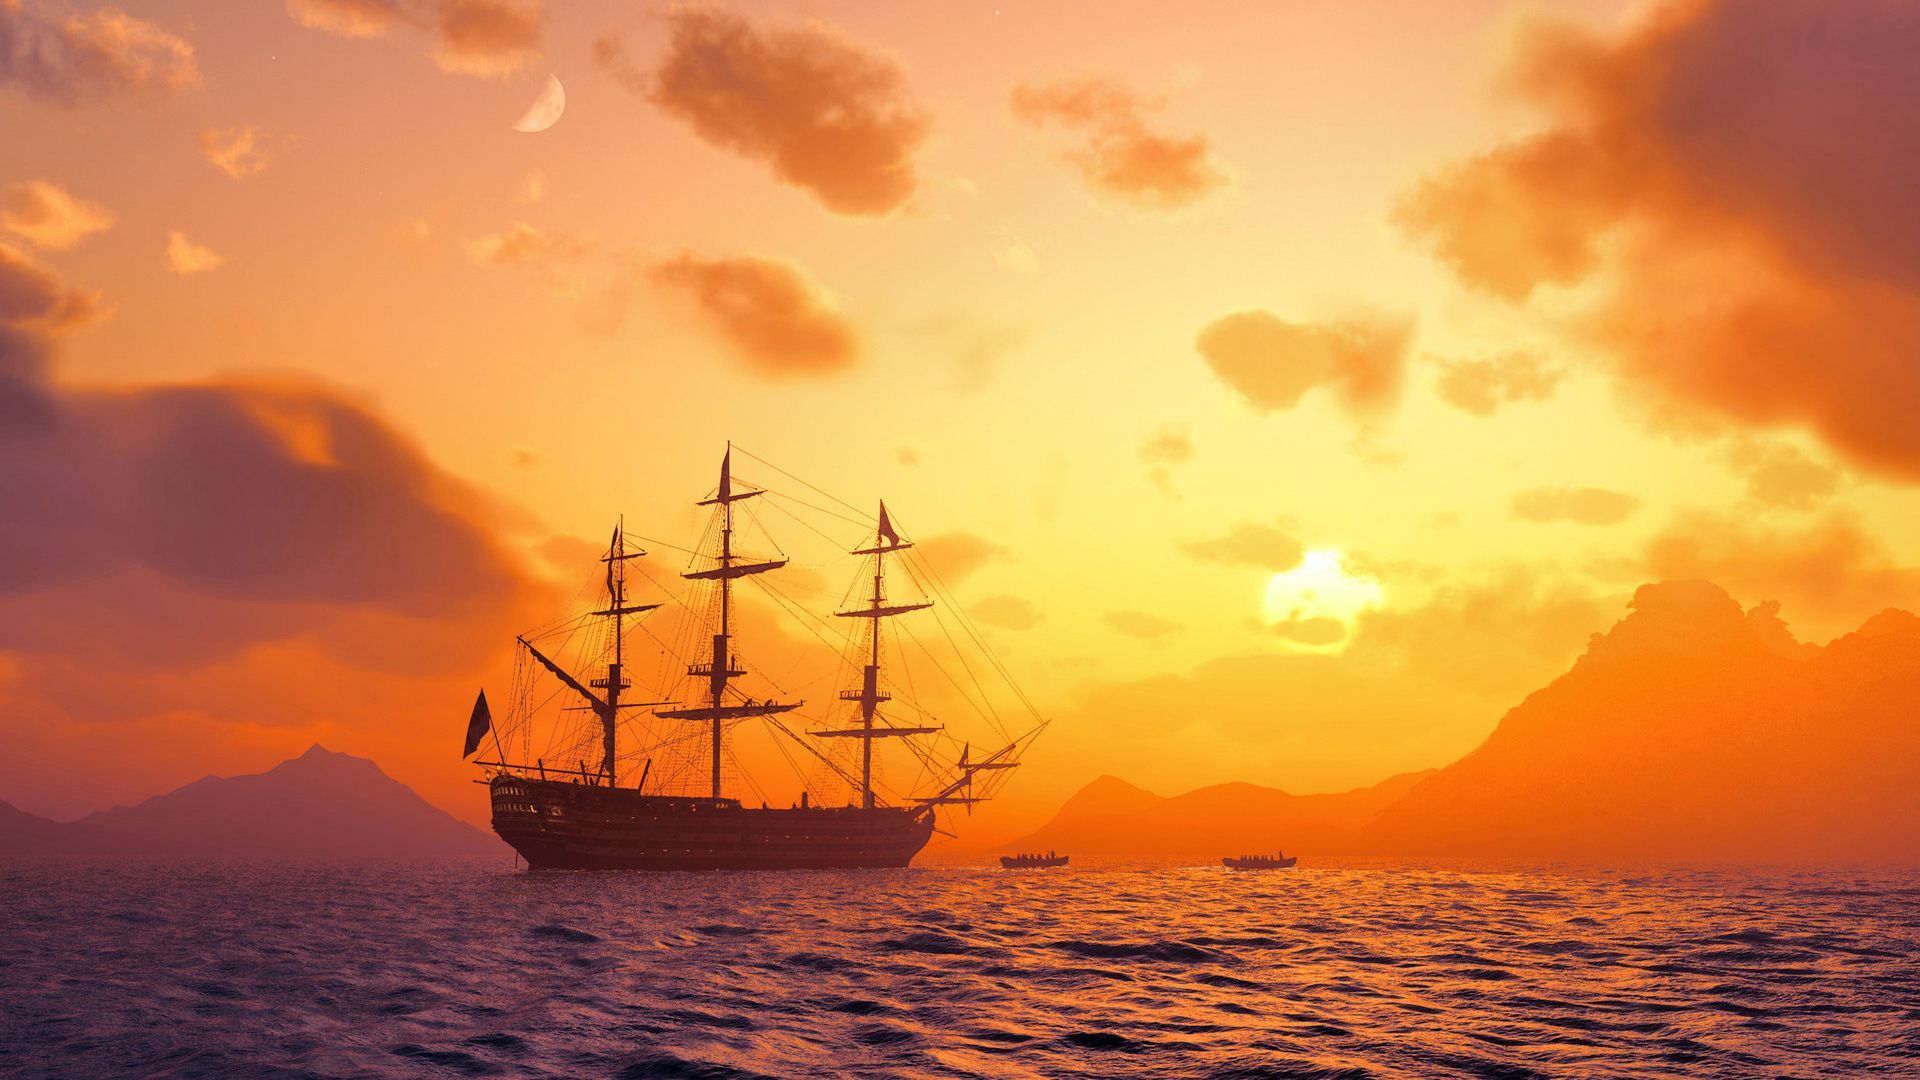 Top Pirate Ship Wallpaper 1920x1080 Images for Pinterest